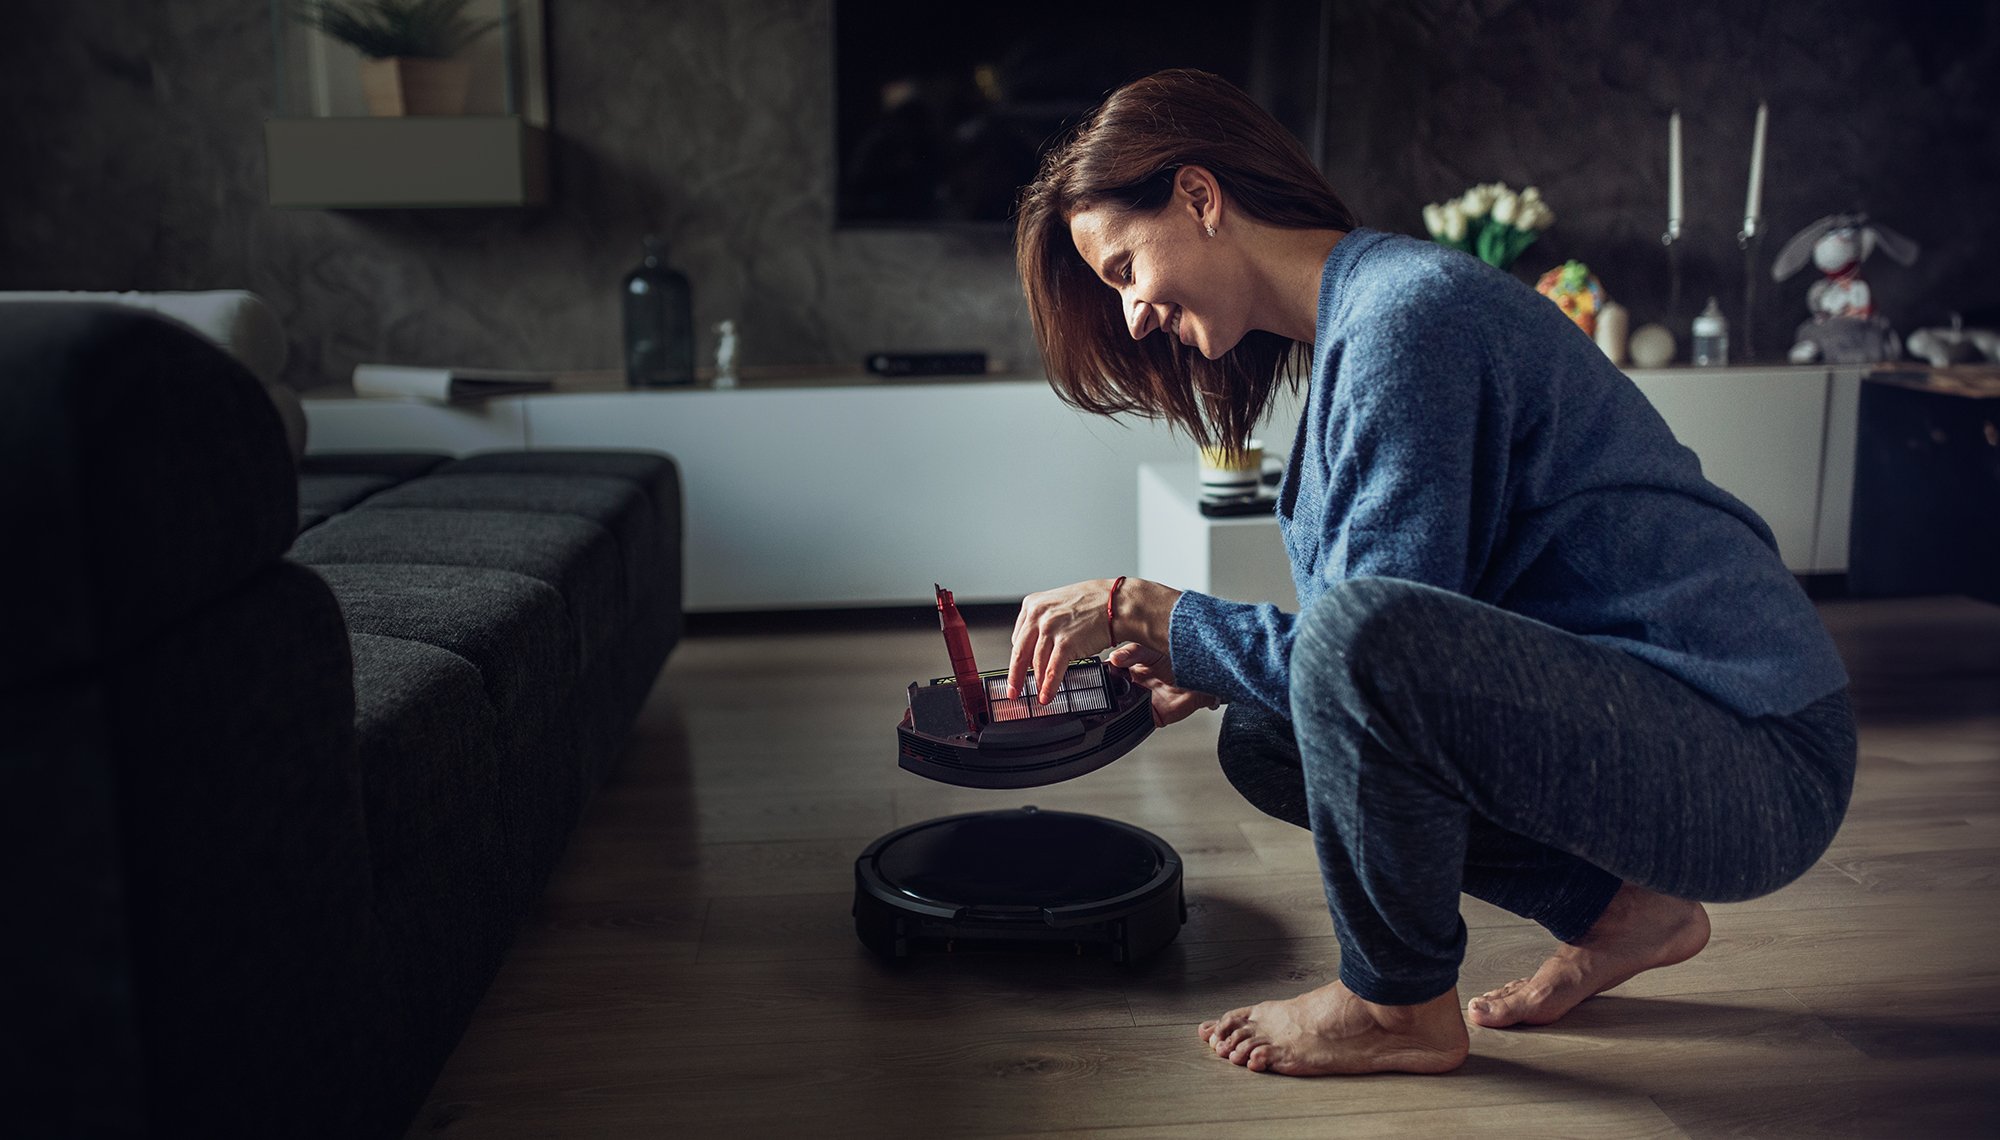 an image of a smiling woman in a domestic situation inspecting batteries in a small device which appears to be a robot vacuum cleaner